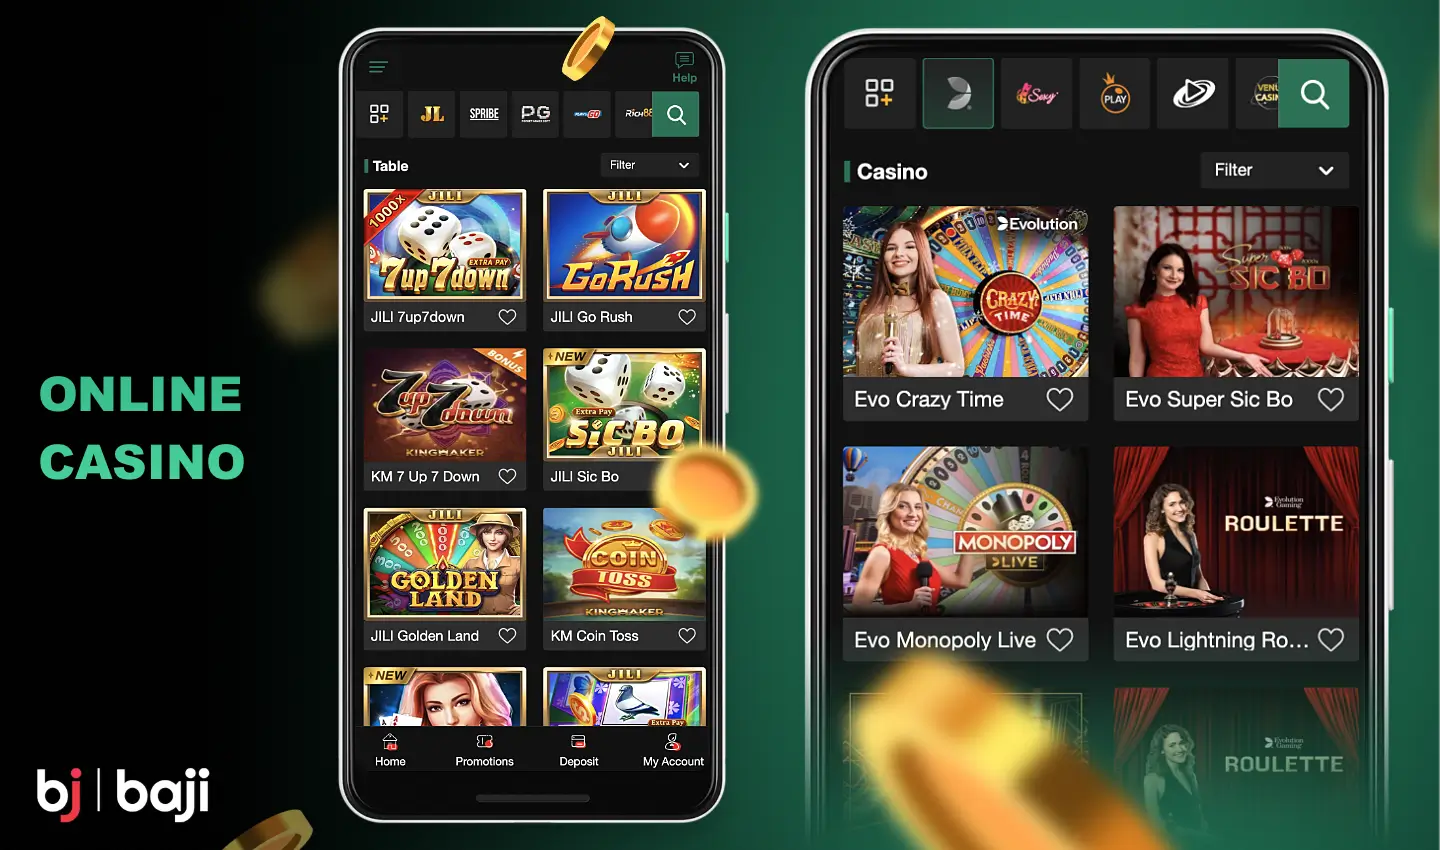 At Baji 555 online casino, users have access to hundreds of exciting games including slot machines, lotteries, arcade games, roulette and more